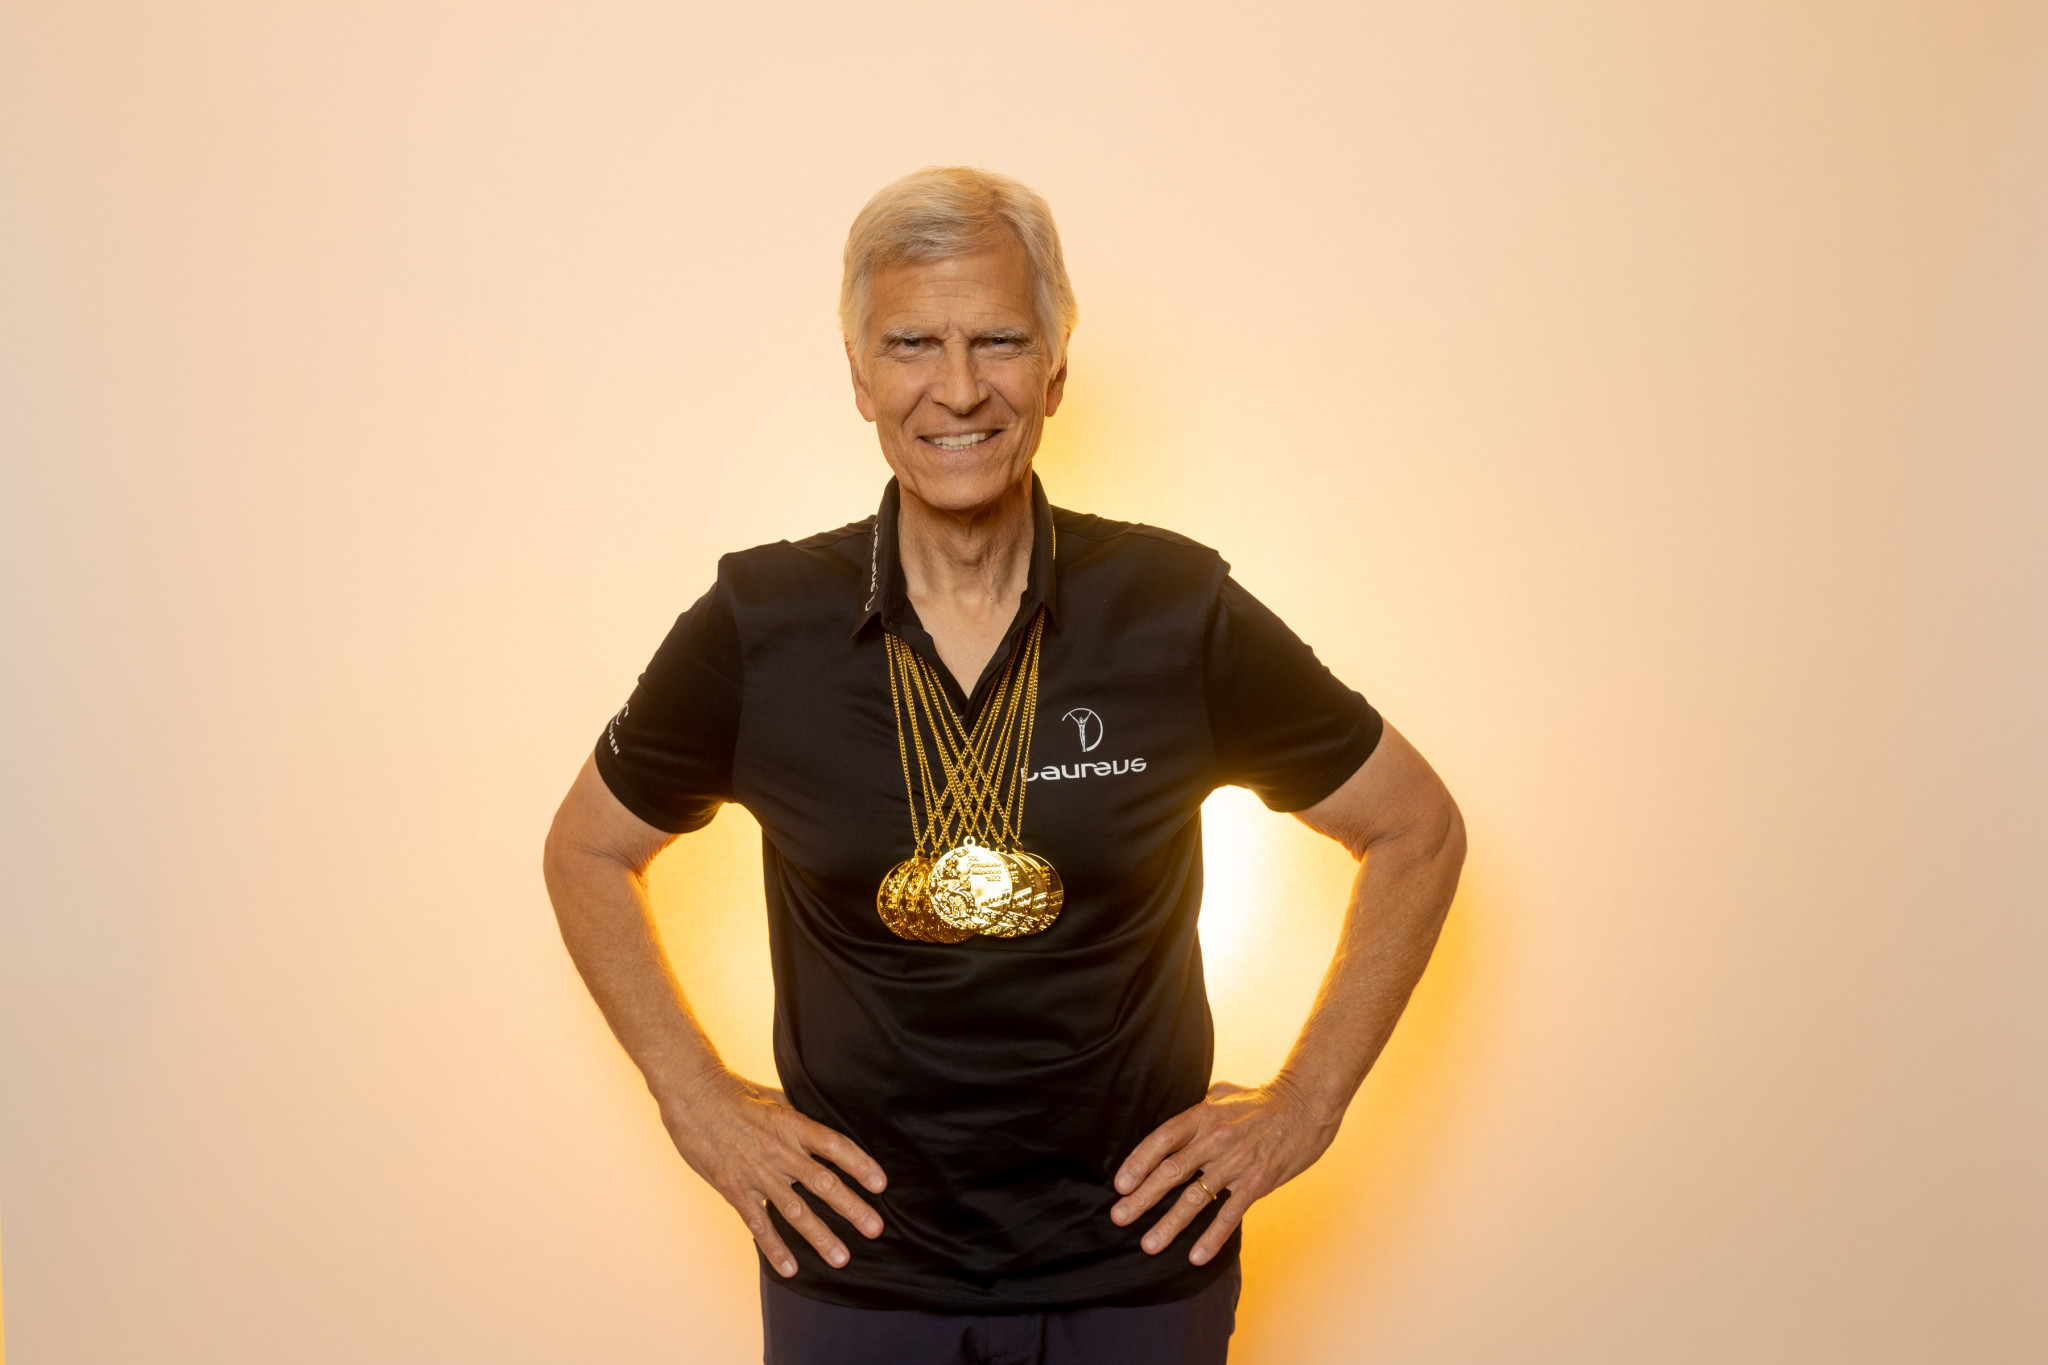 Mark Spitz recreates a famous pose with his seven gold medals from 1972 ©Laureus Sport for Good